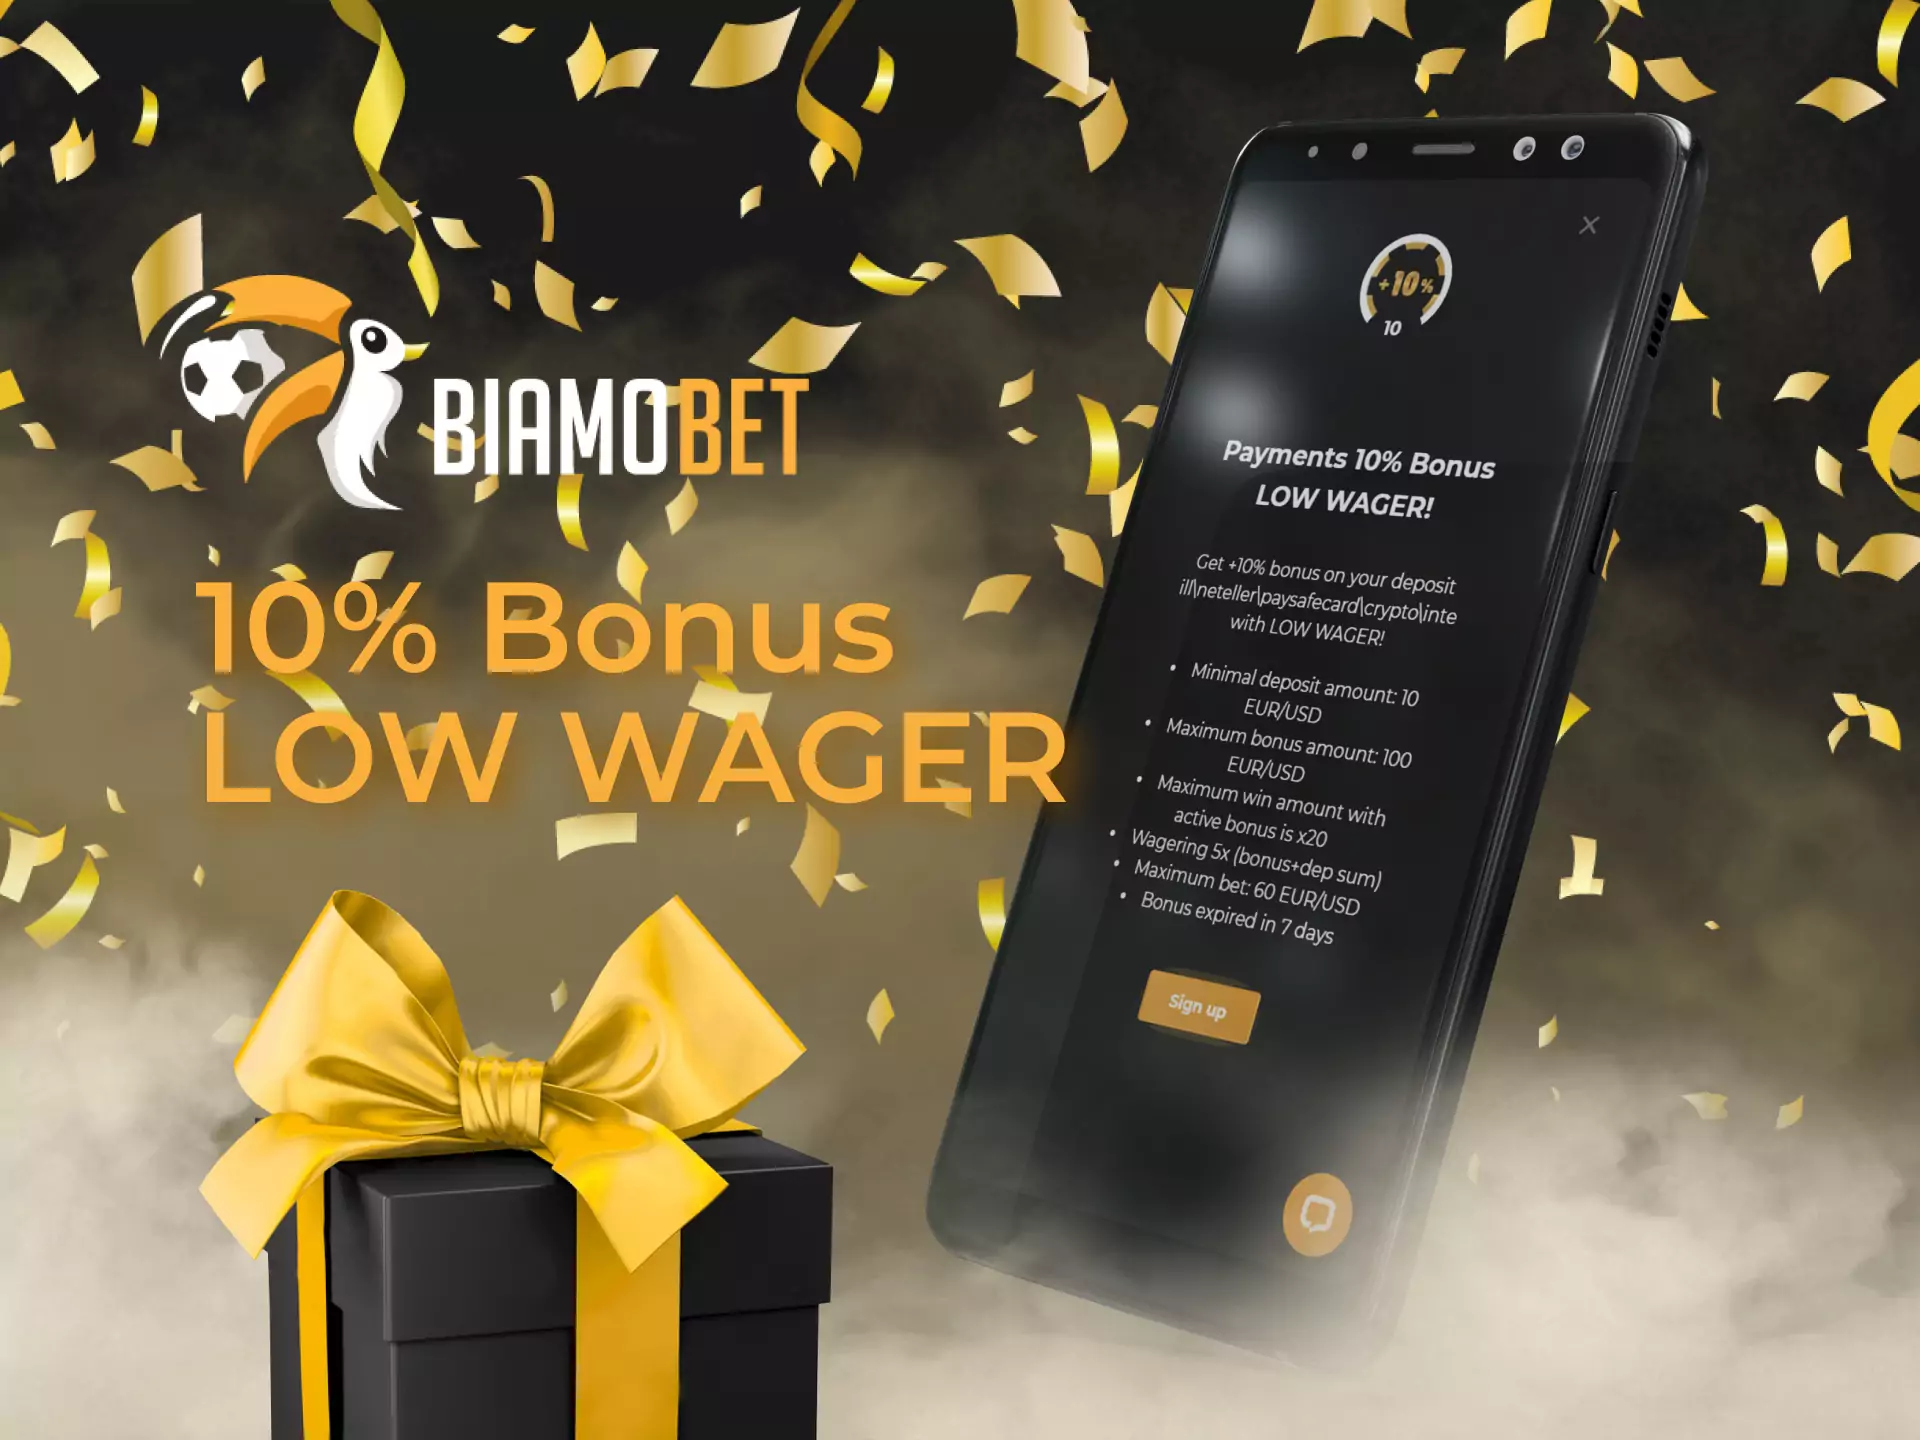 To get an additional bonus on your deposit, confirm participating in this Biamobet promotion.